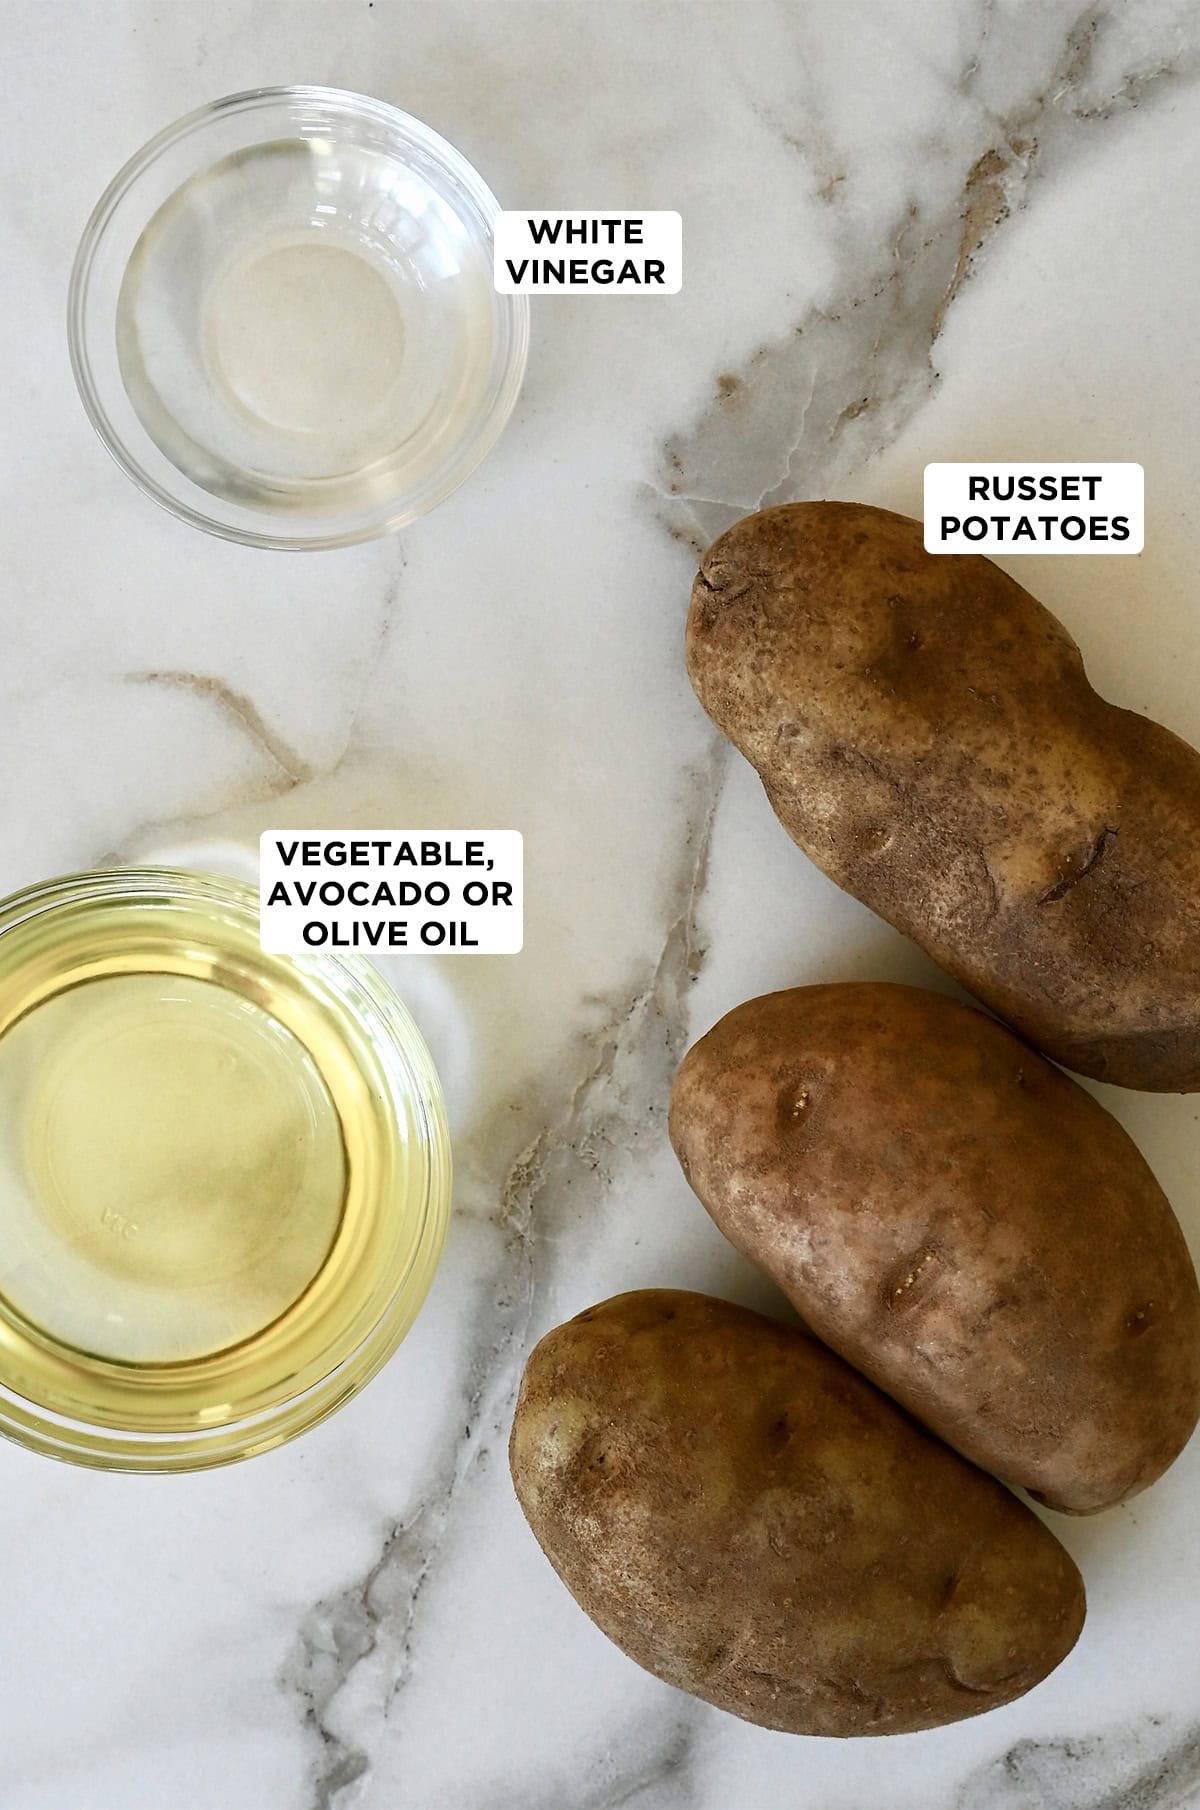 A small bowl filled with white vinegar next to a medium bowl with vegetable oil and three Russet potatoes.